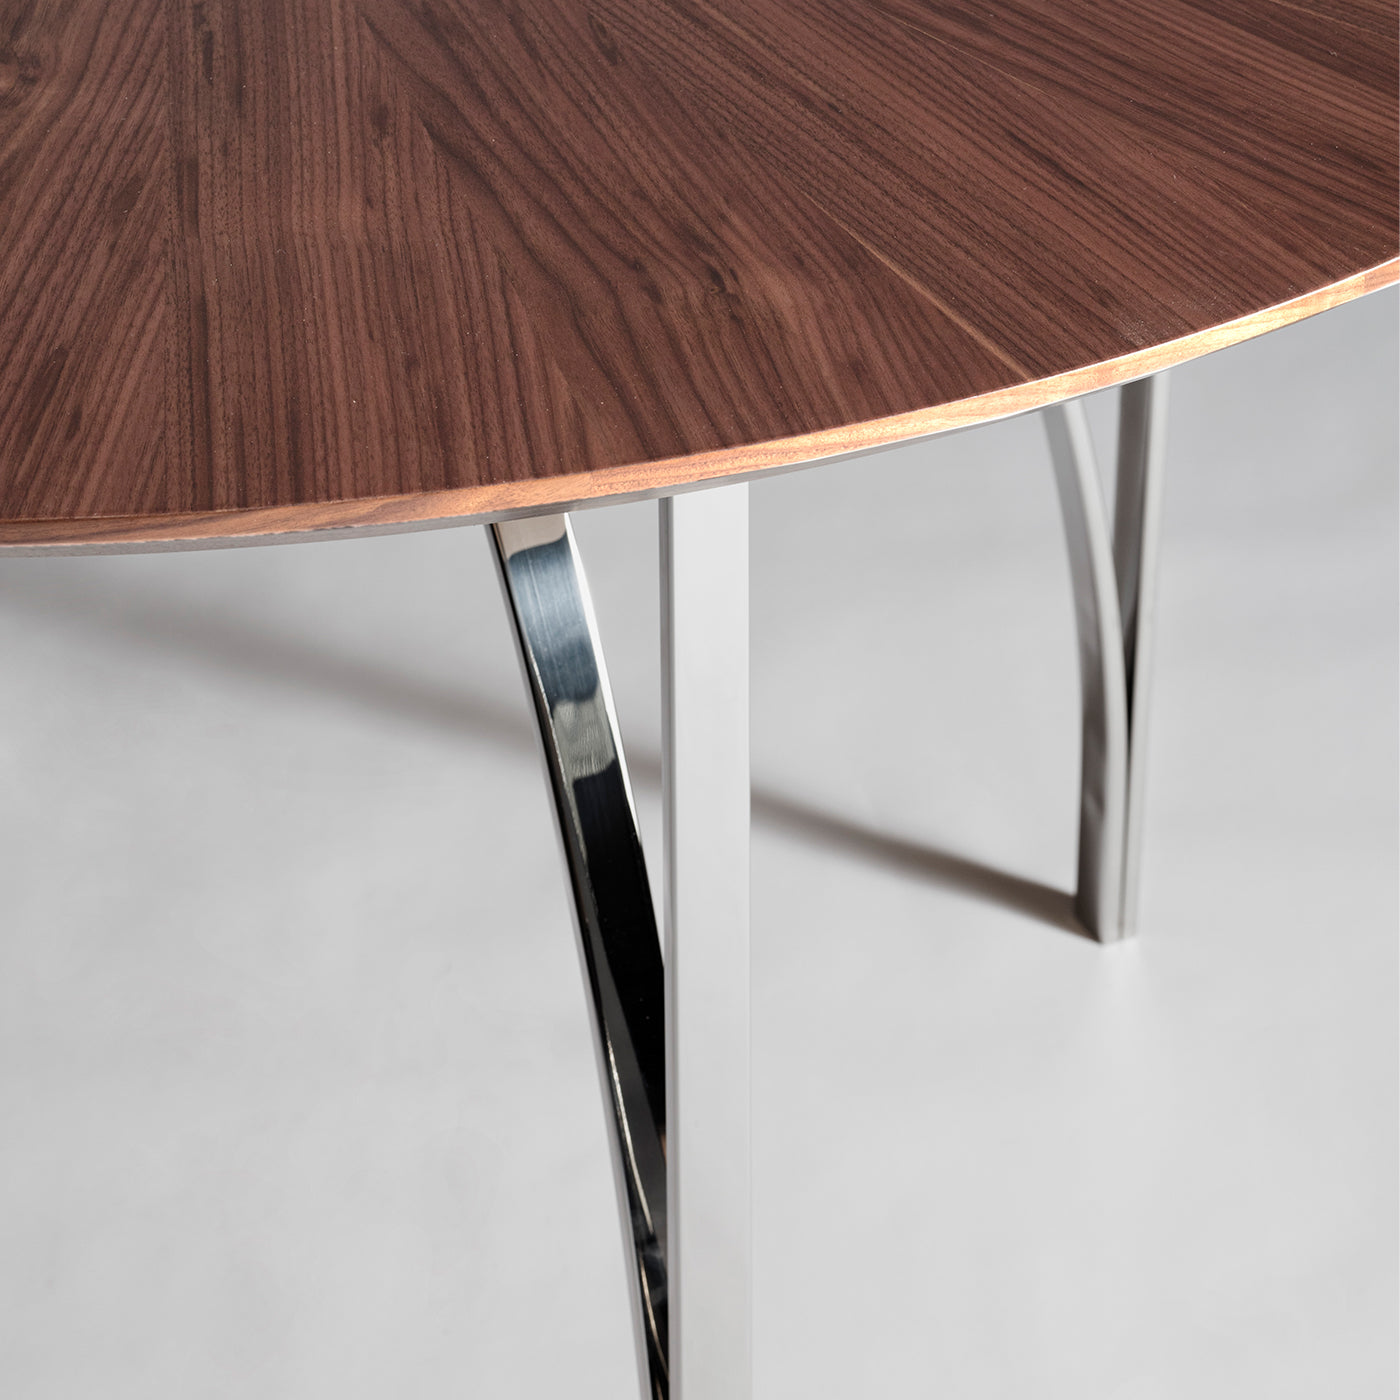 Archie Collection Canaletto Walnut Dining Table  - Alternative view 3